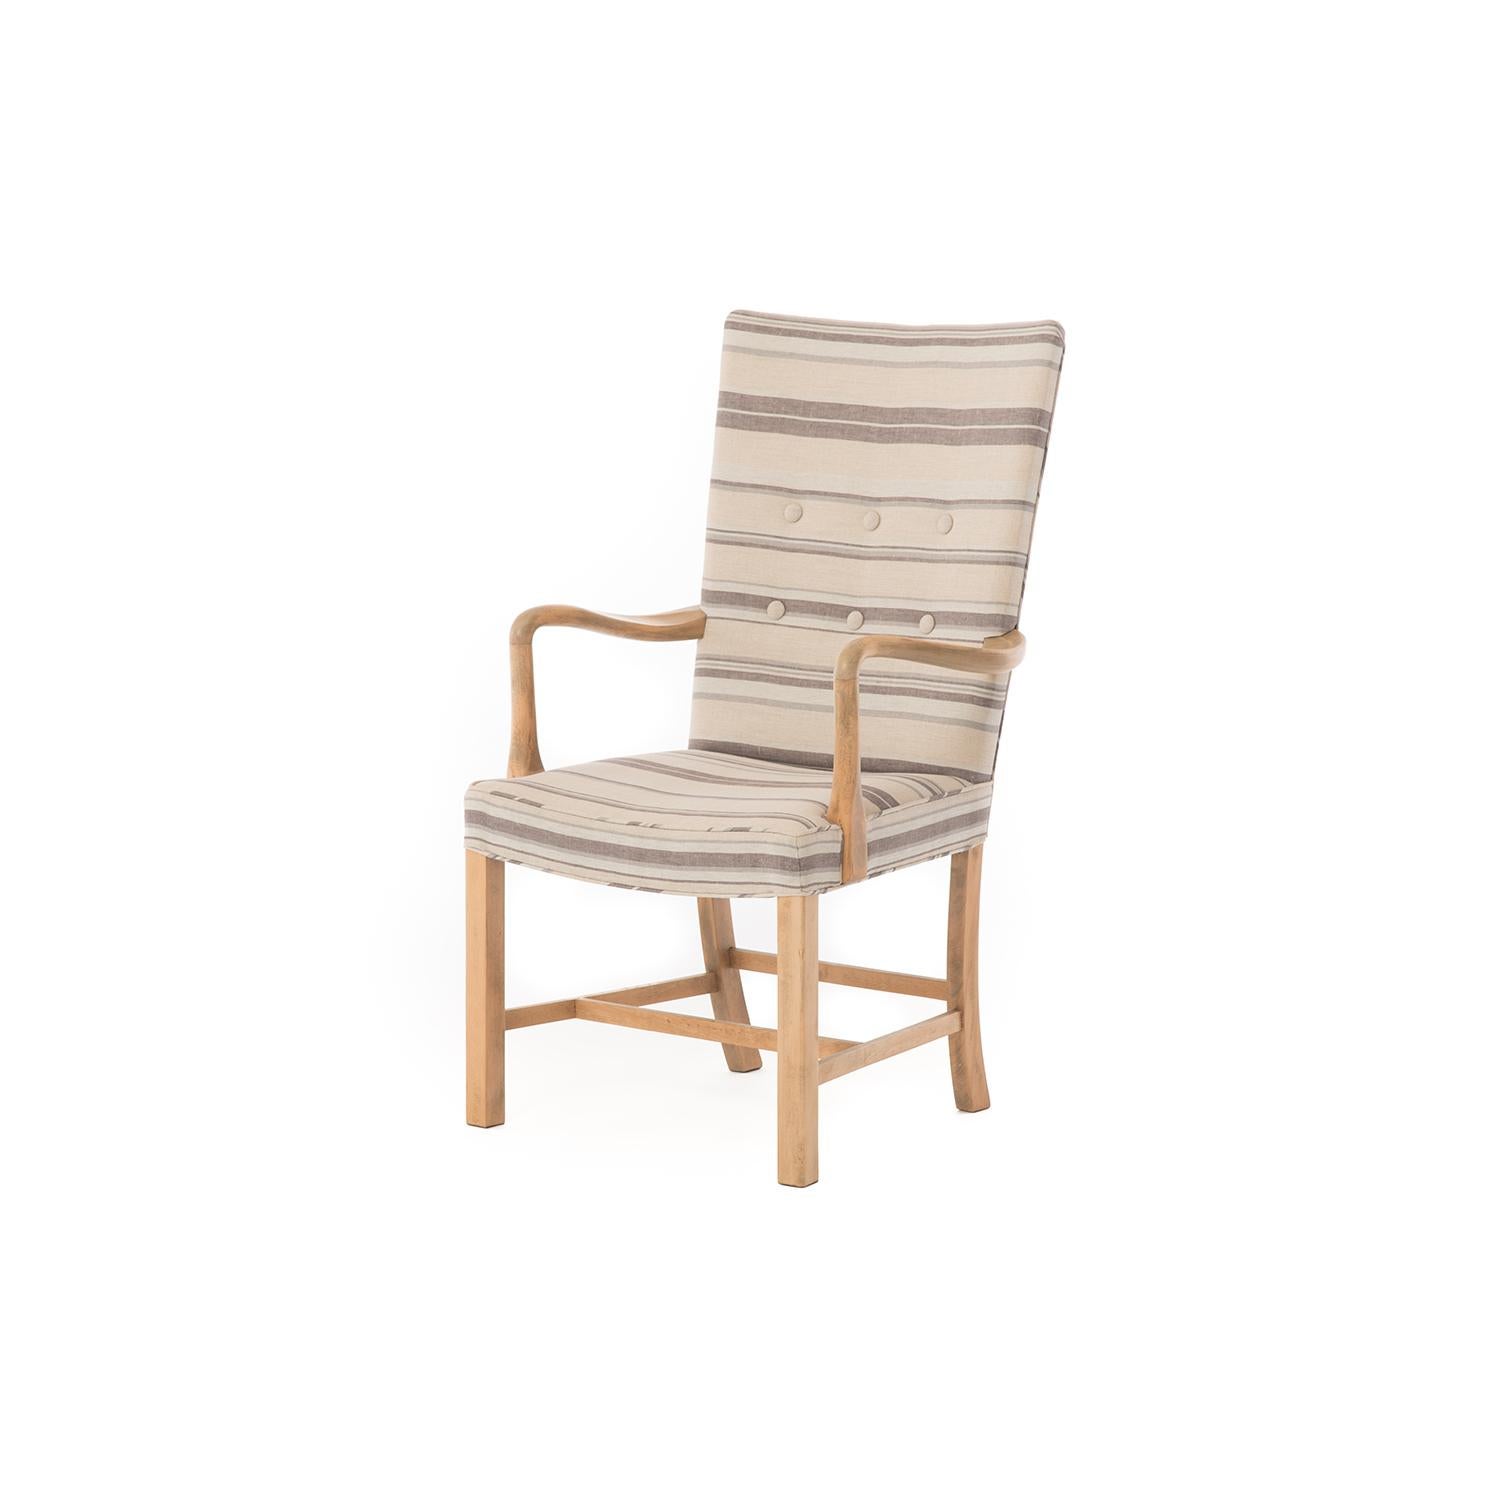 This 1930s high backed lounge chair by Fritz Hansen has been restored in a cooling striped Rivera linen by Raoul textiles. The frame has been fully restored for structure. The frame finish has been updated but the lovely patina this piece has